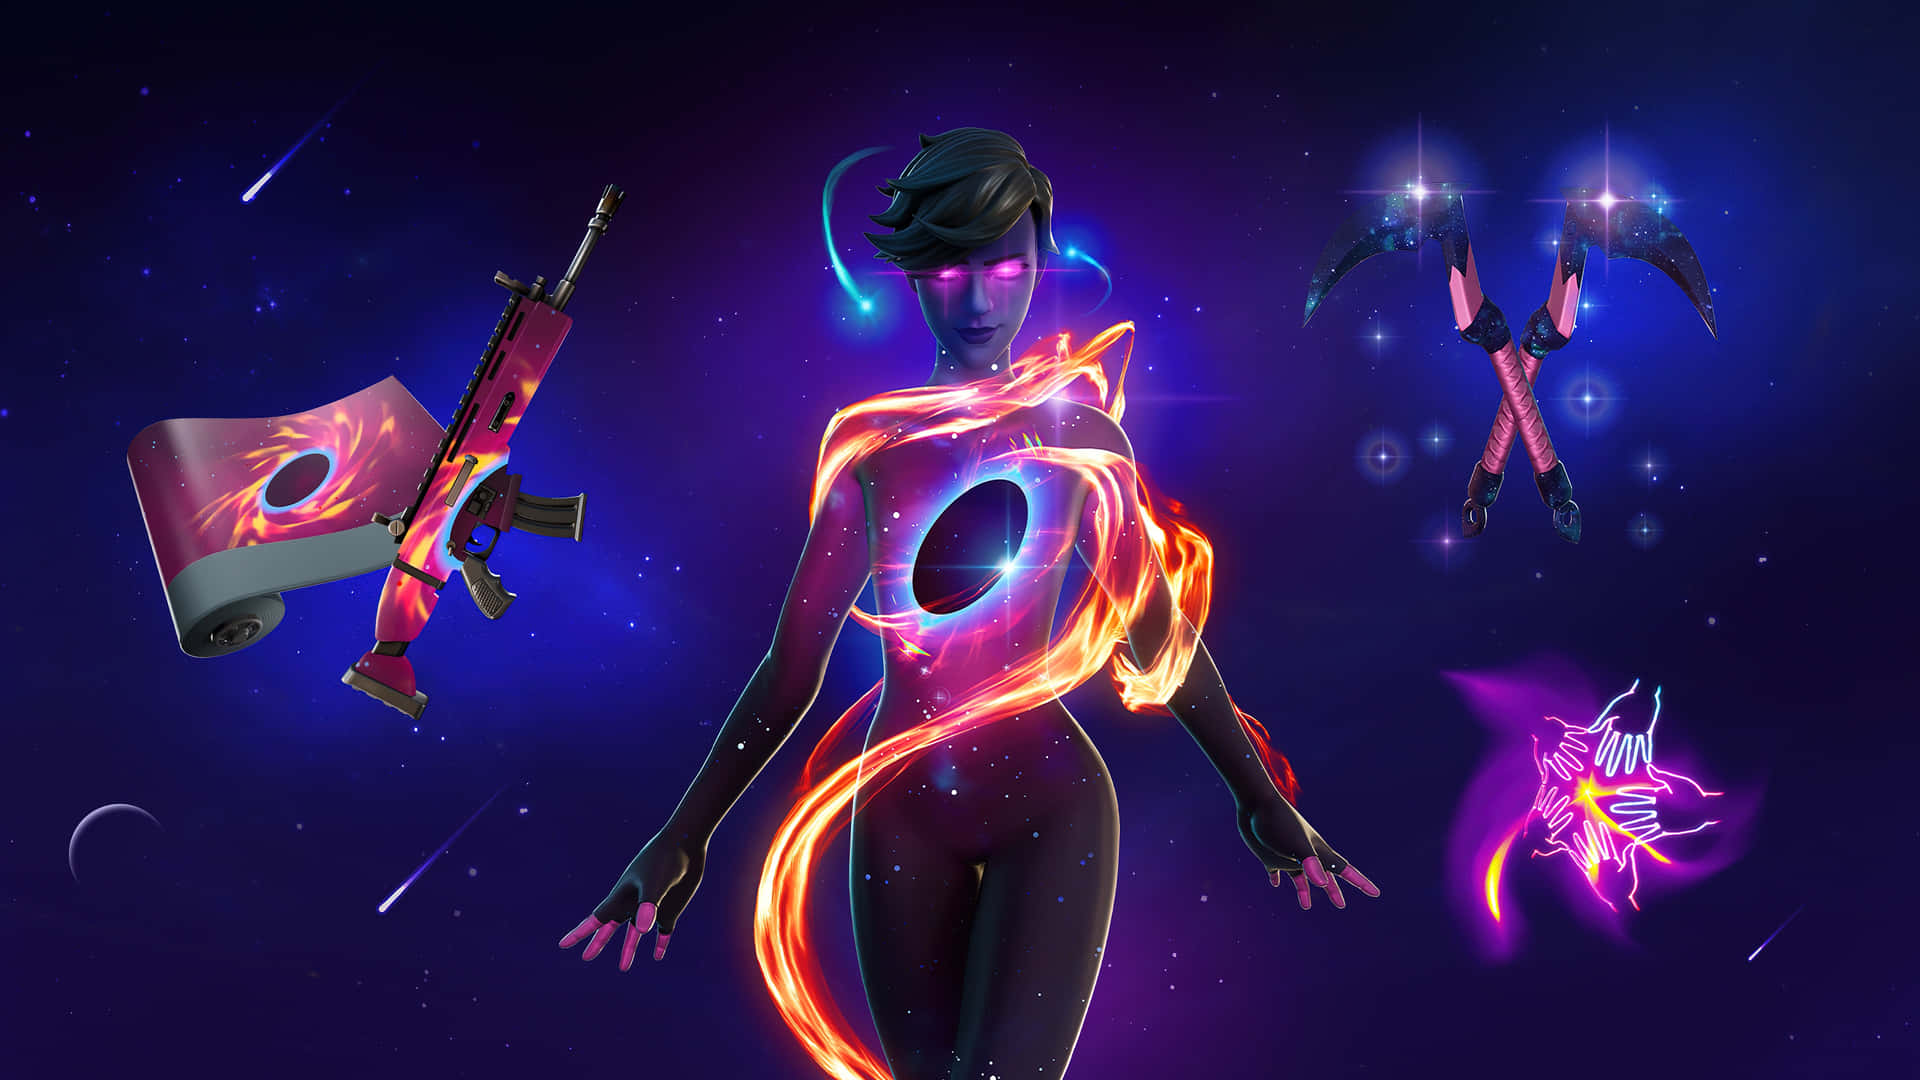 Enter an inter-dimensional battle with Fortnite Galaxy Wallpaper